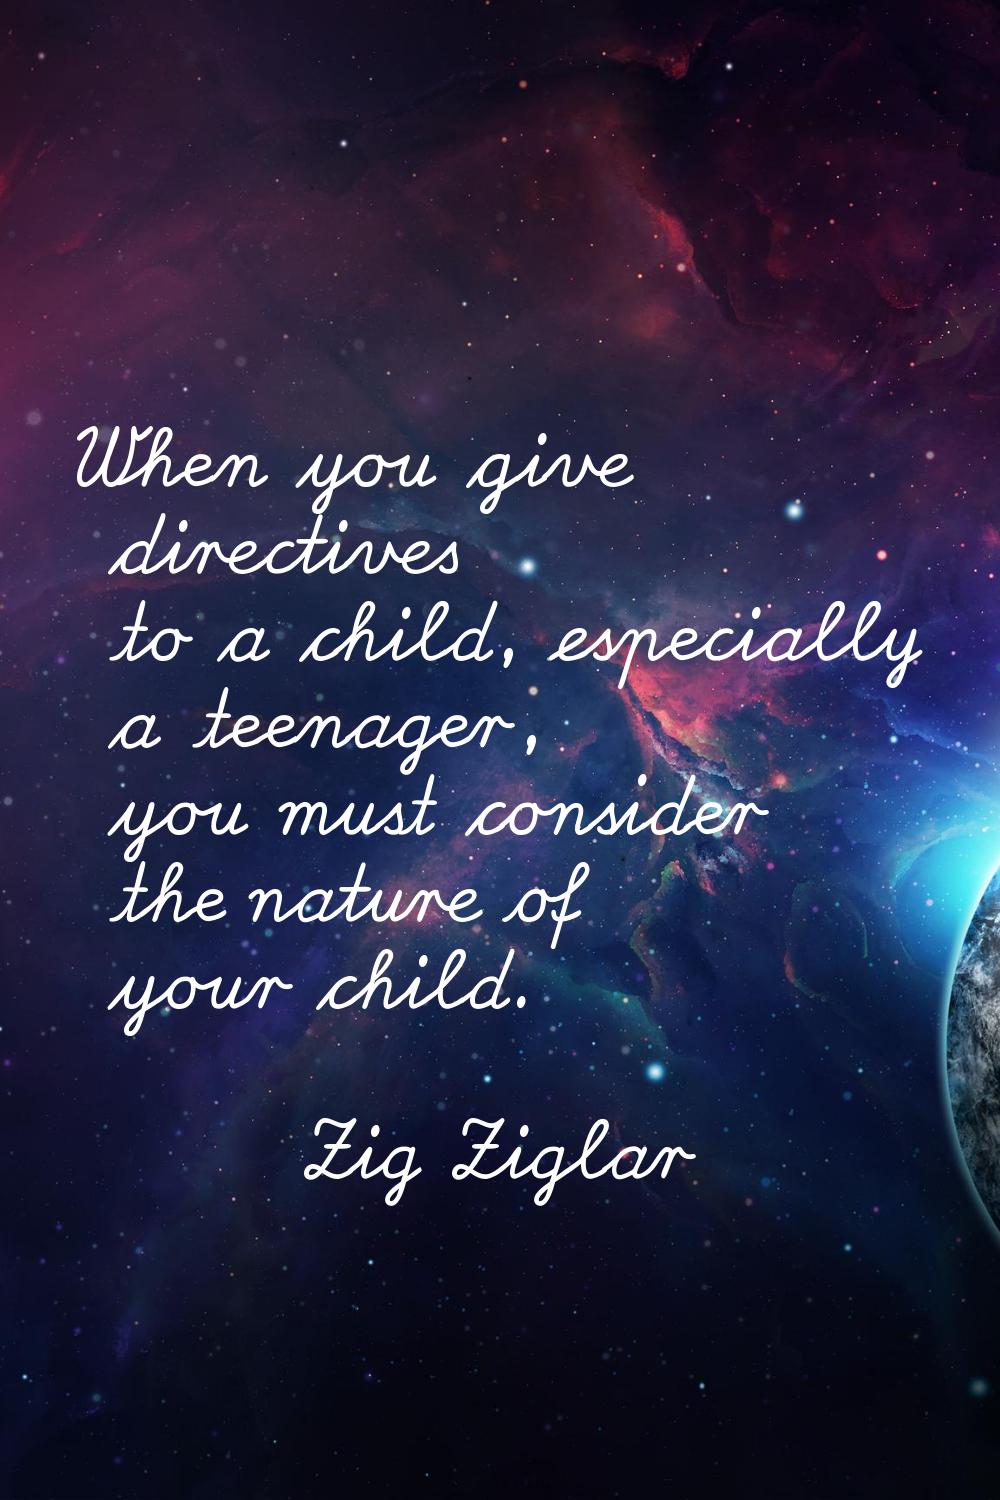 When you give directives to a child, especially a teenager, you must consider the nature of your ch